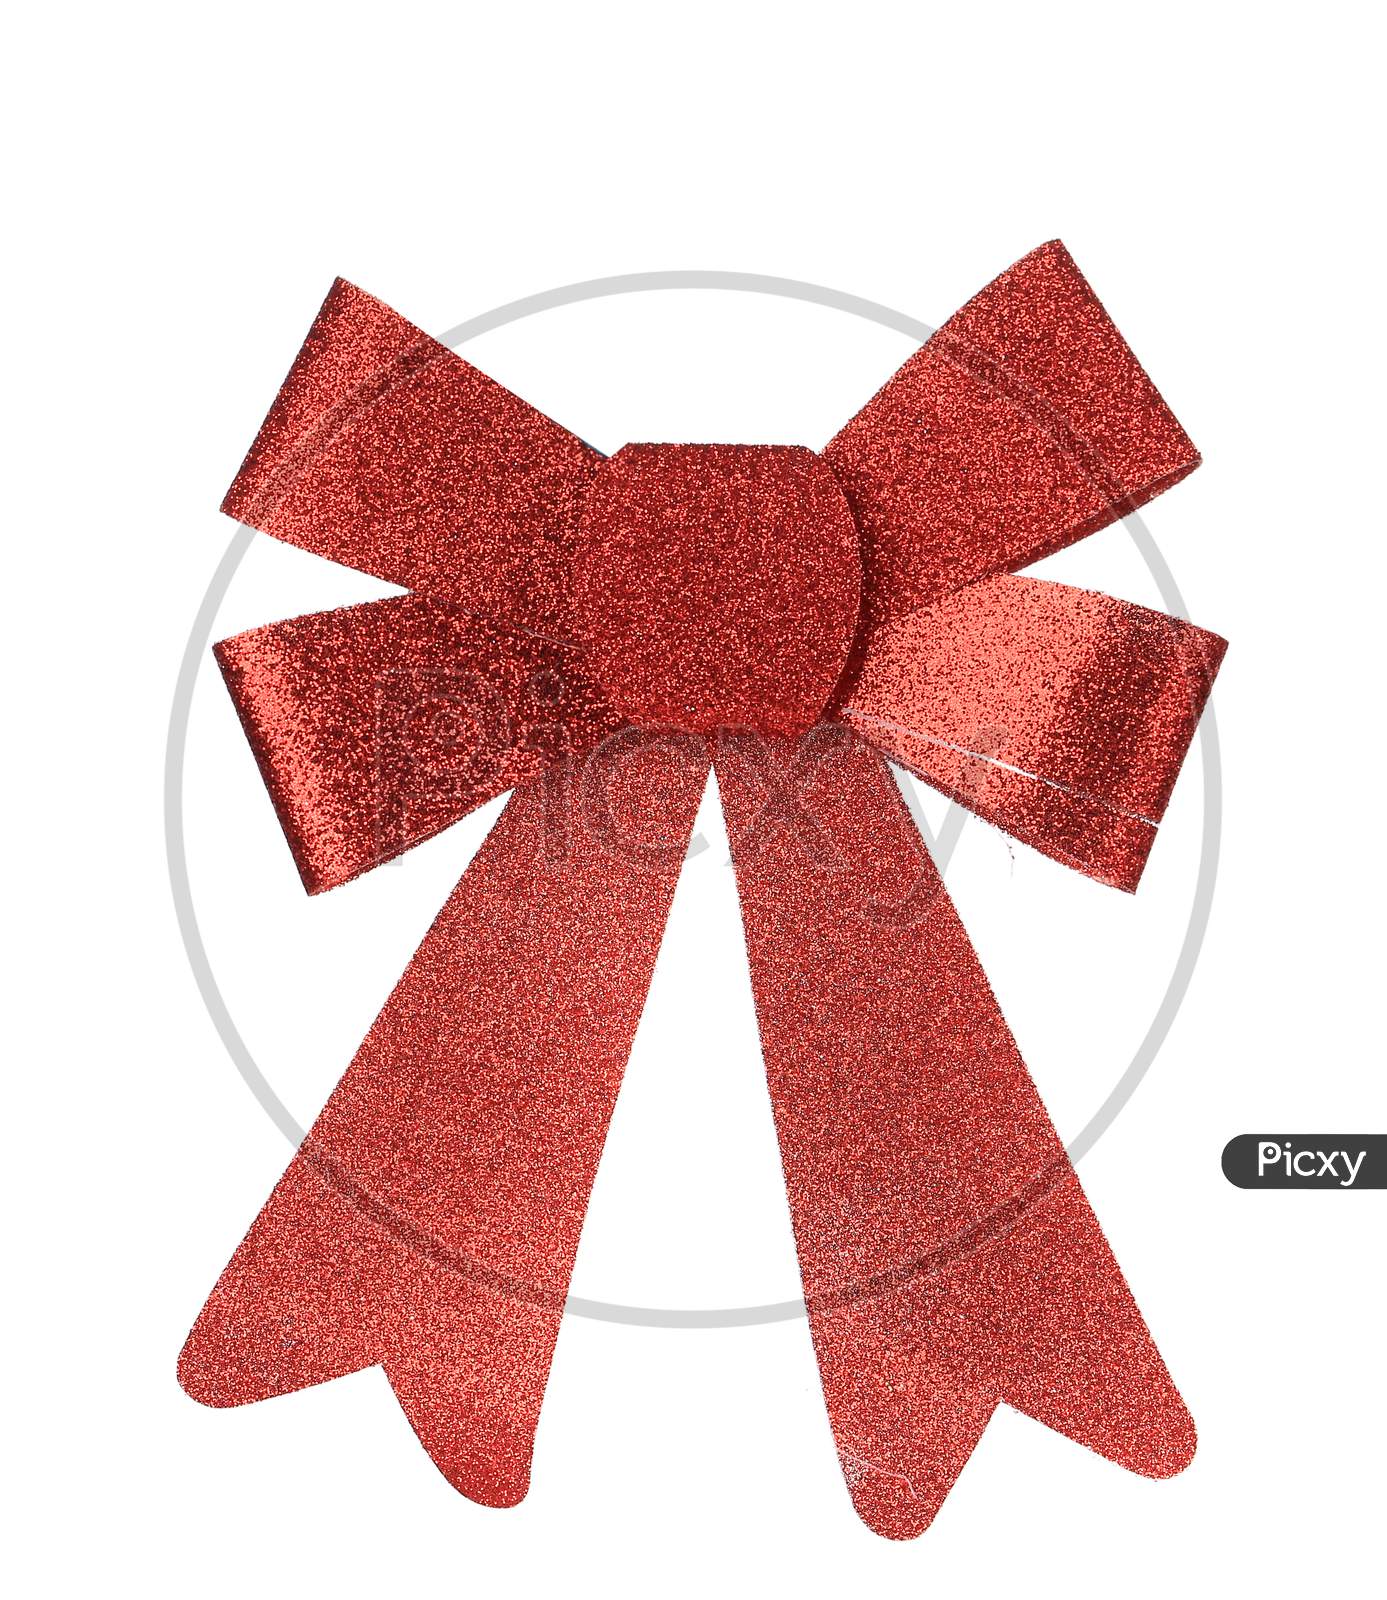 Christmas Red Ribbon Decoration. Isolated On A White Background.